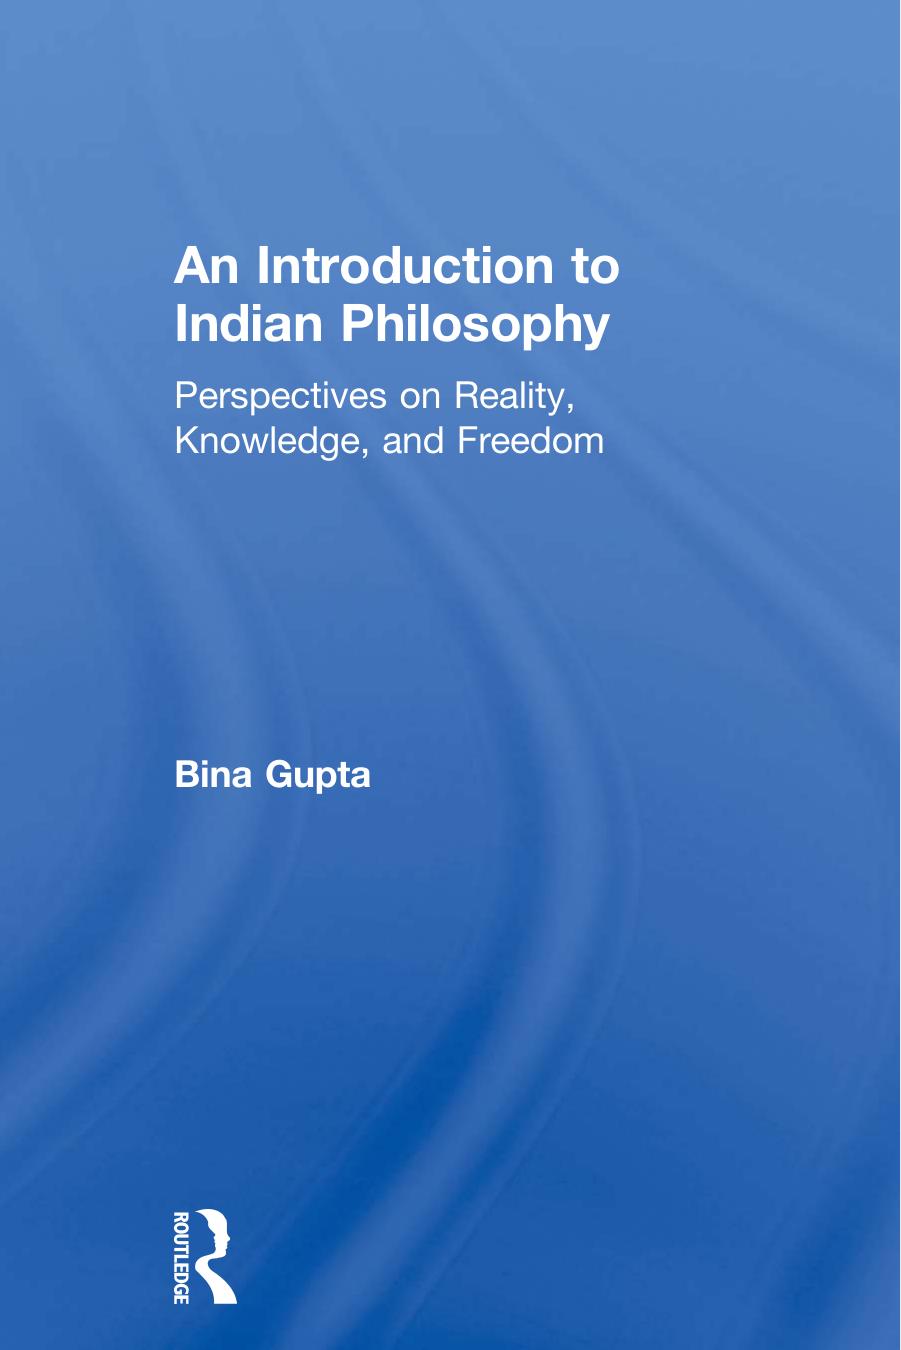 An Introduction to Indian Philosophy: Perspectives on Reality, Knowledge, and Freedom